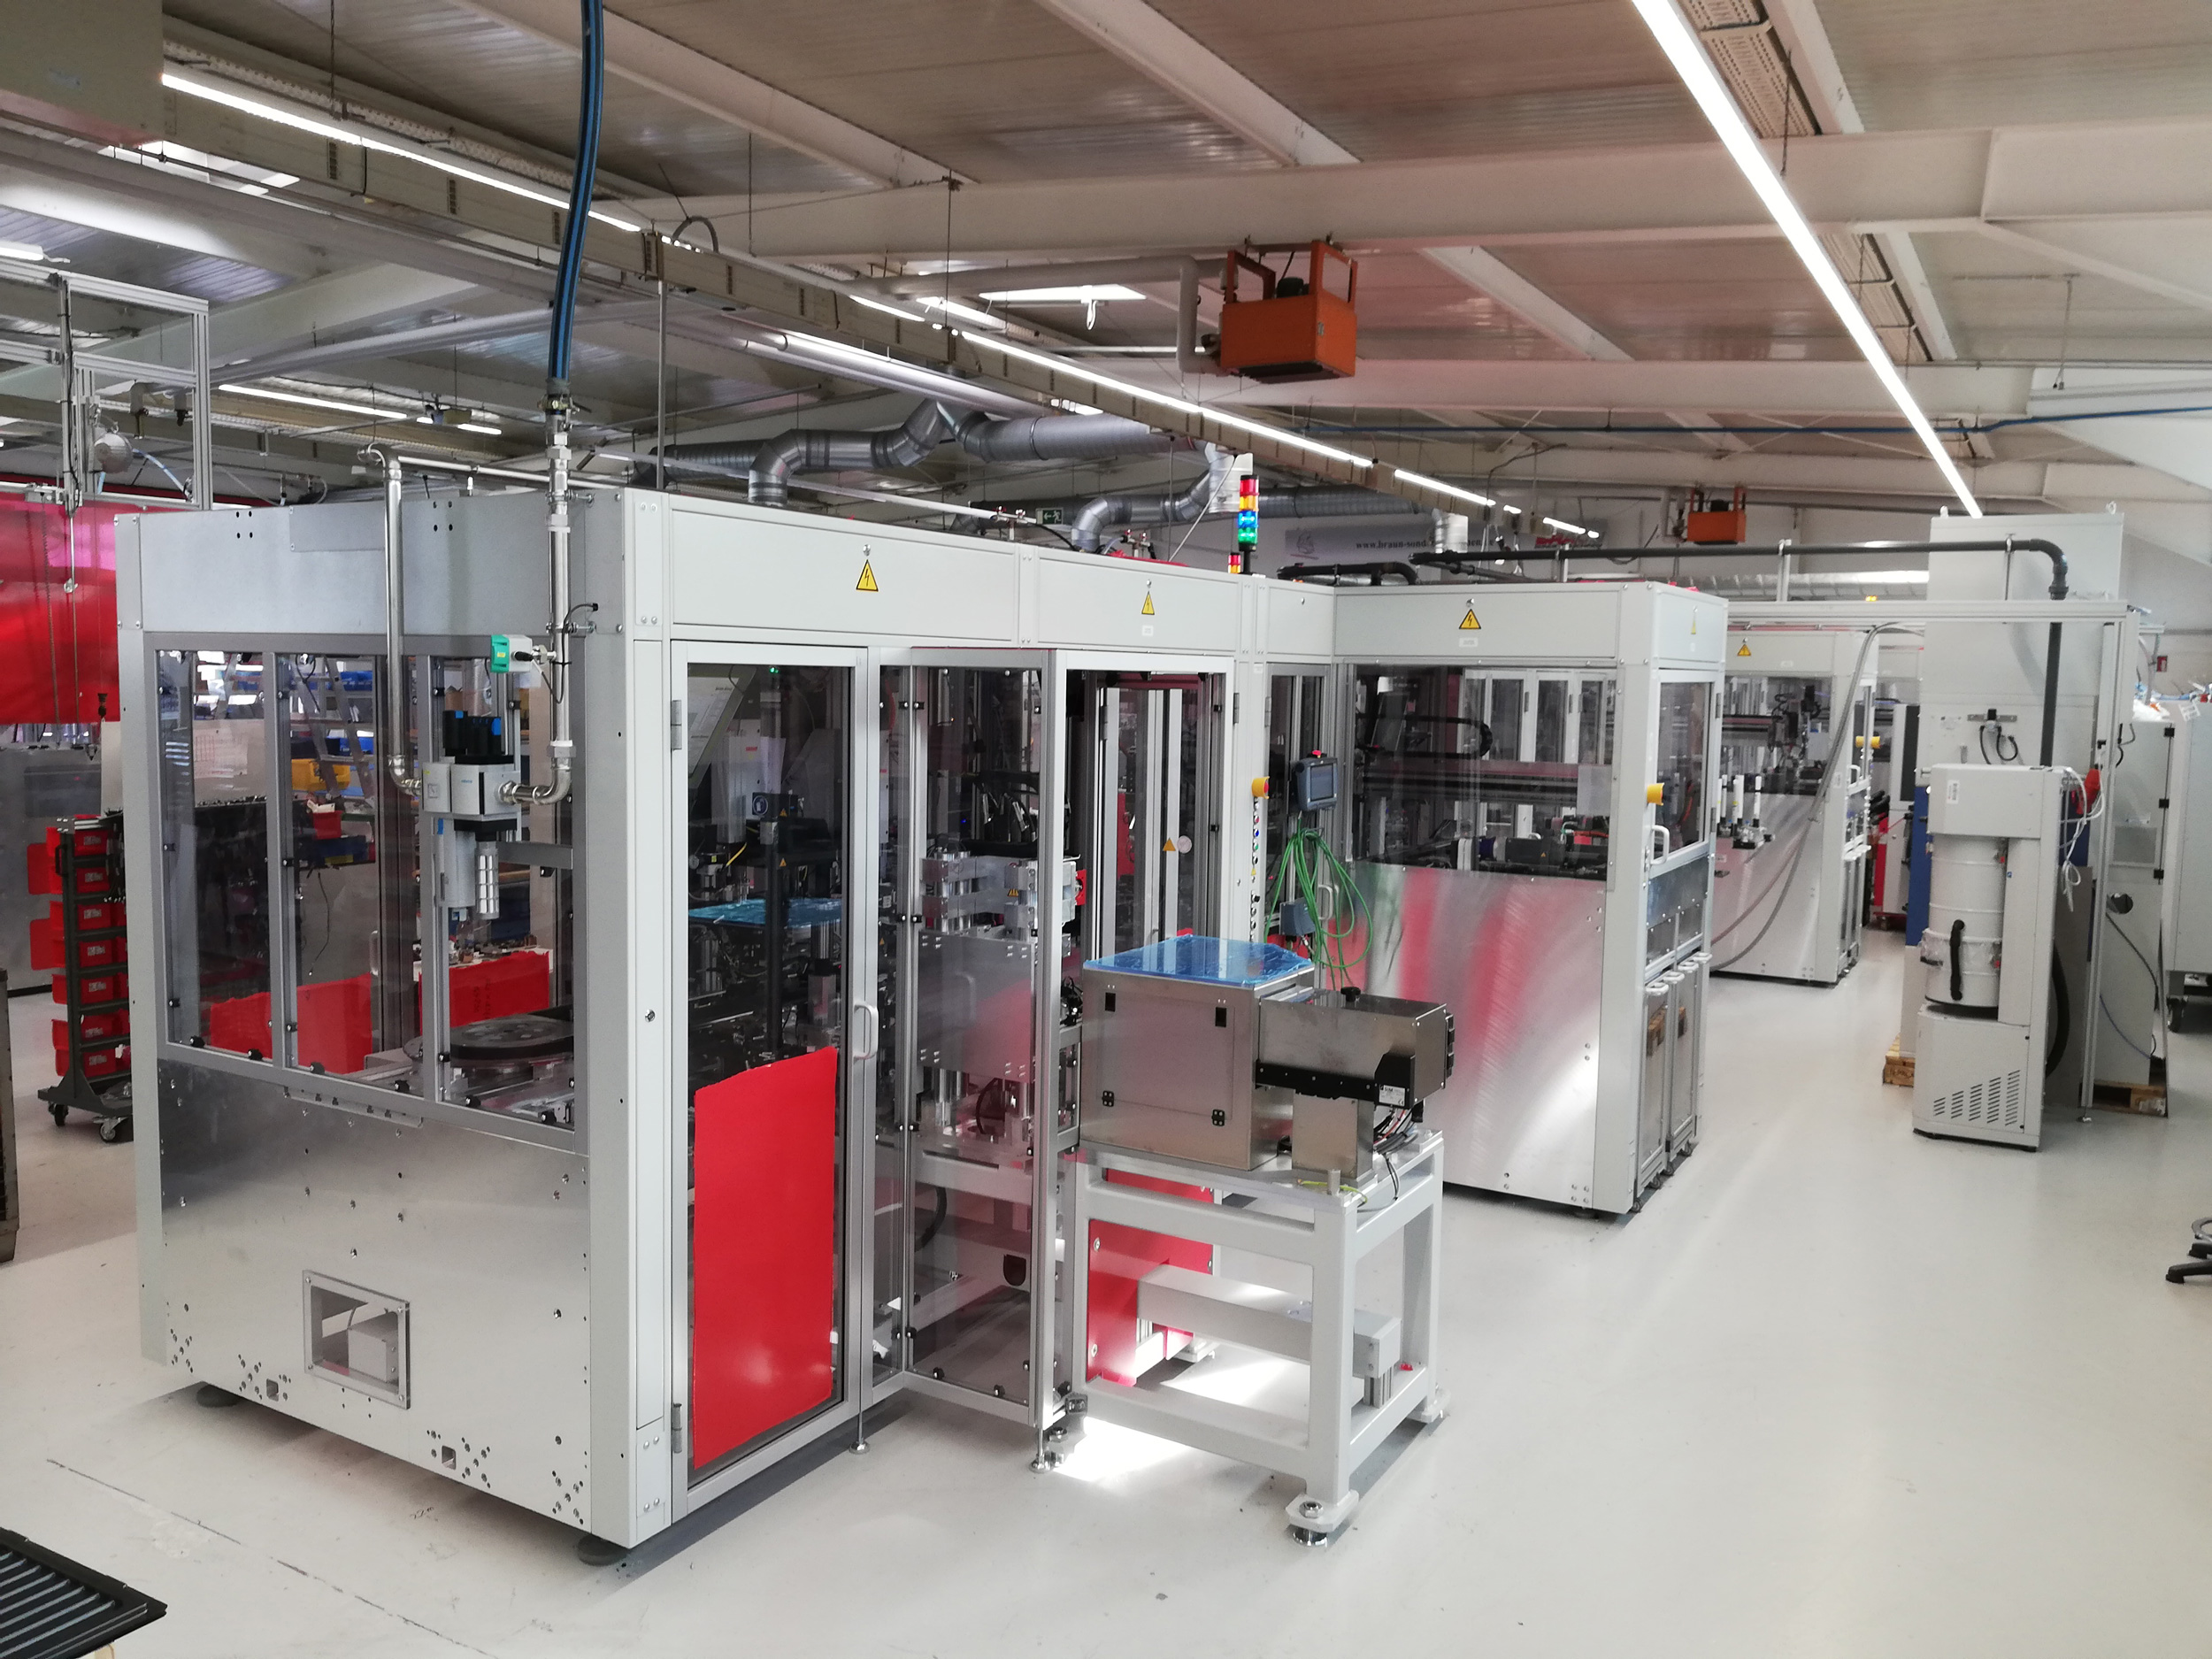 Final assembly line for electric motors in the automotive sector